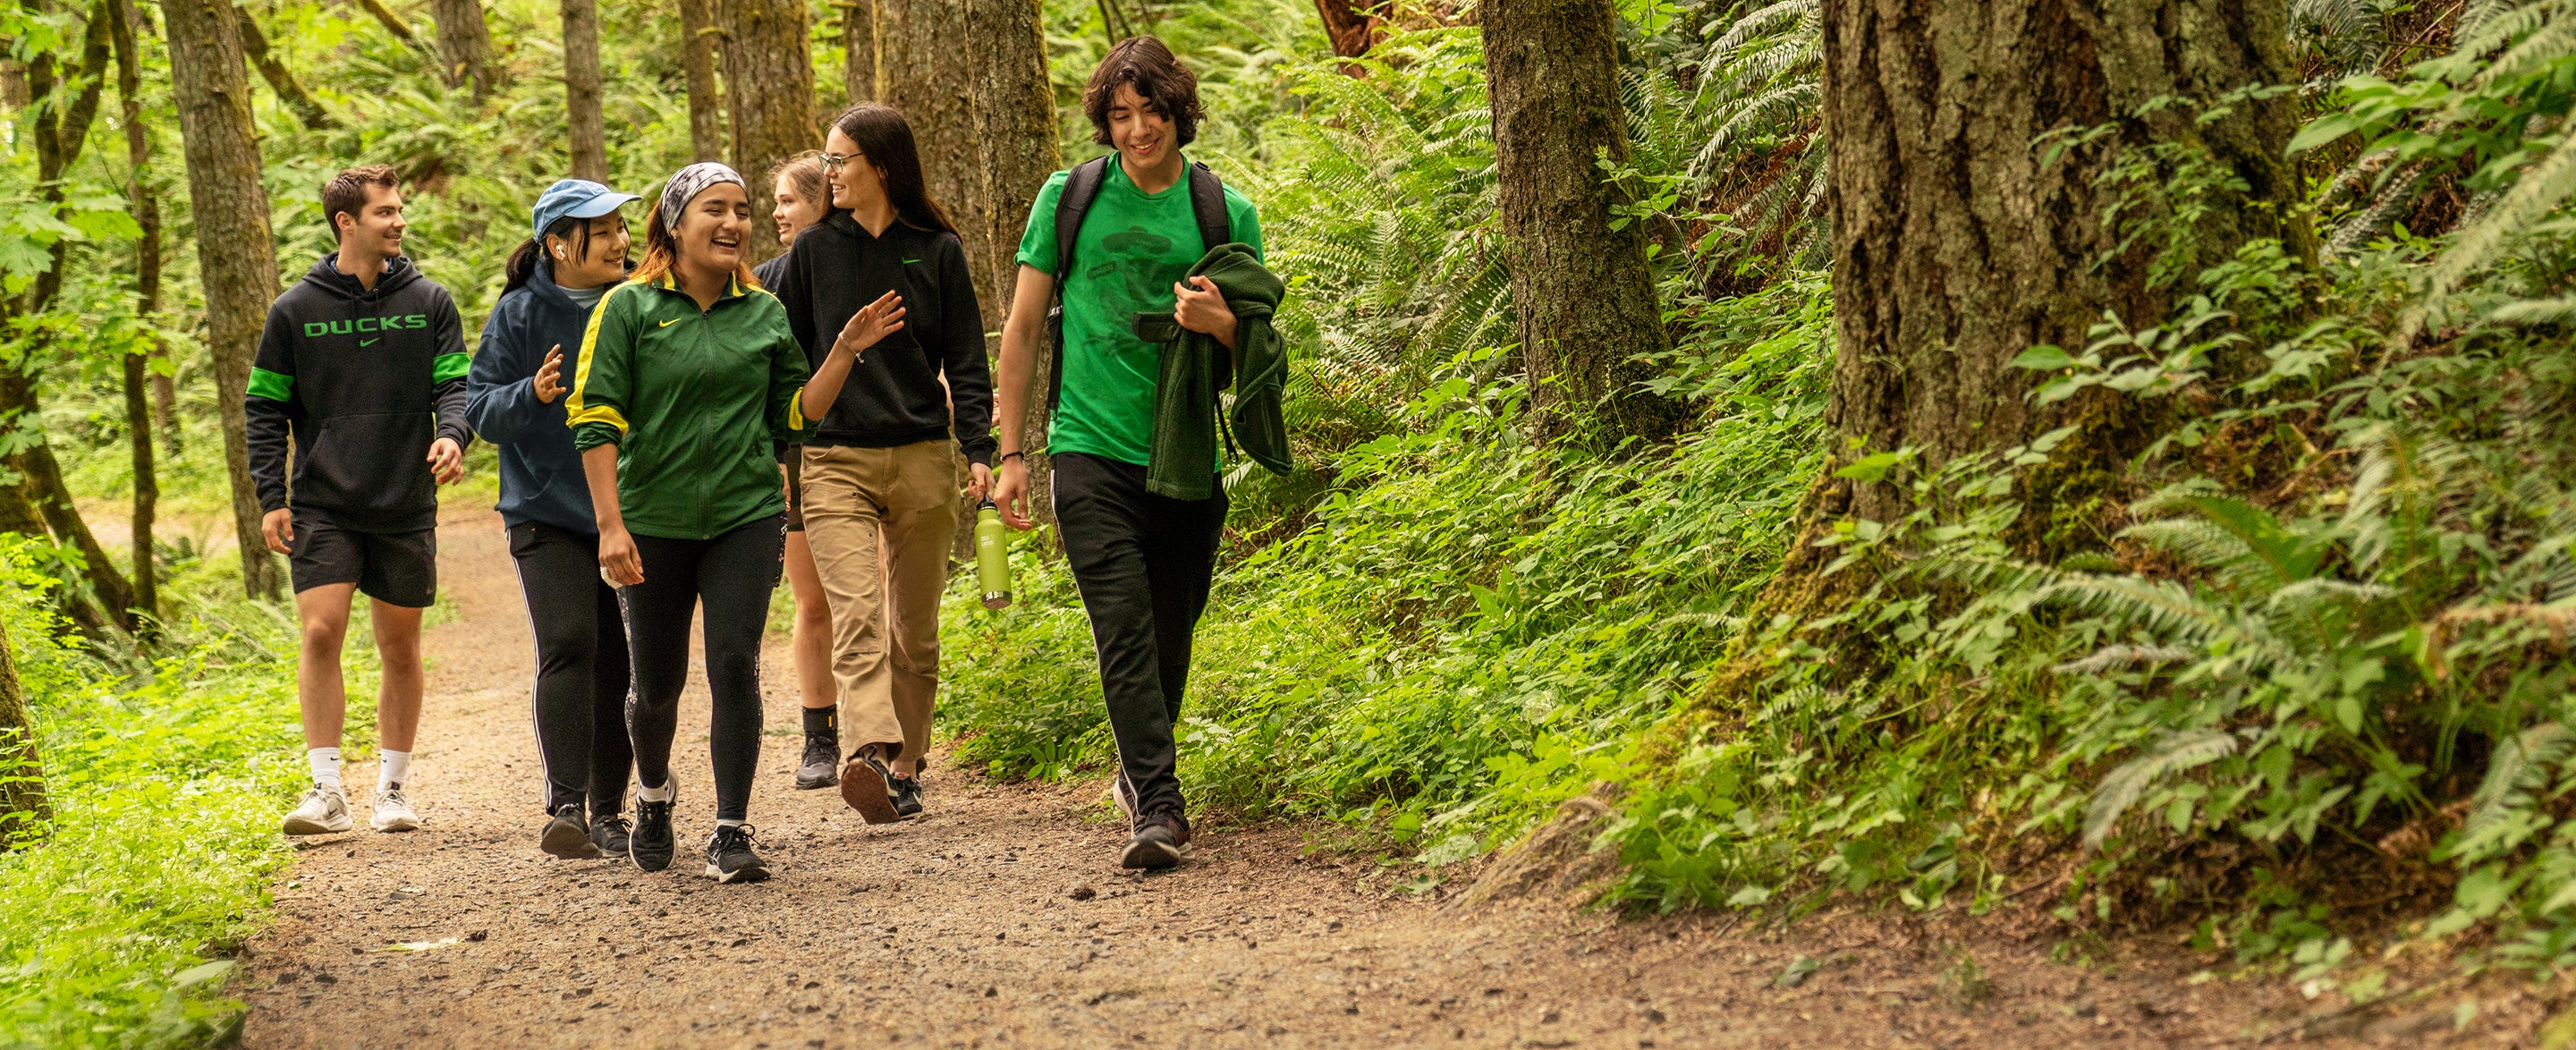 A group of students hiking on a dirt path through the forest.